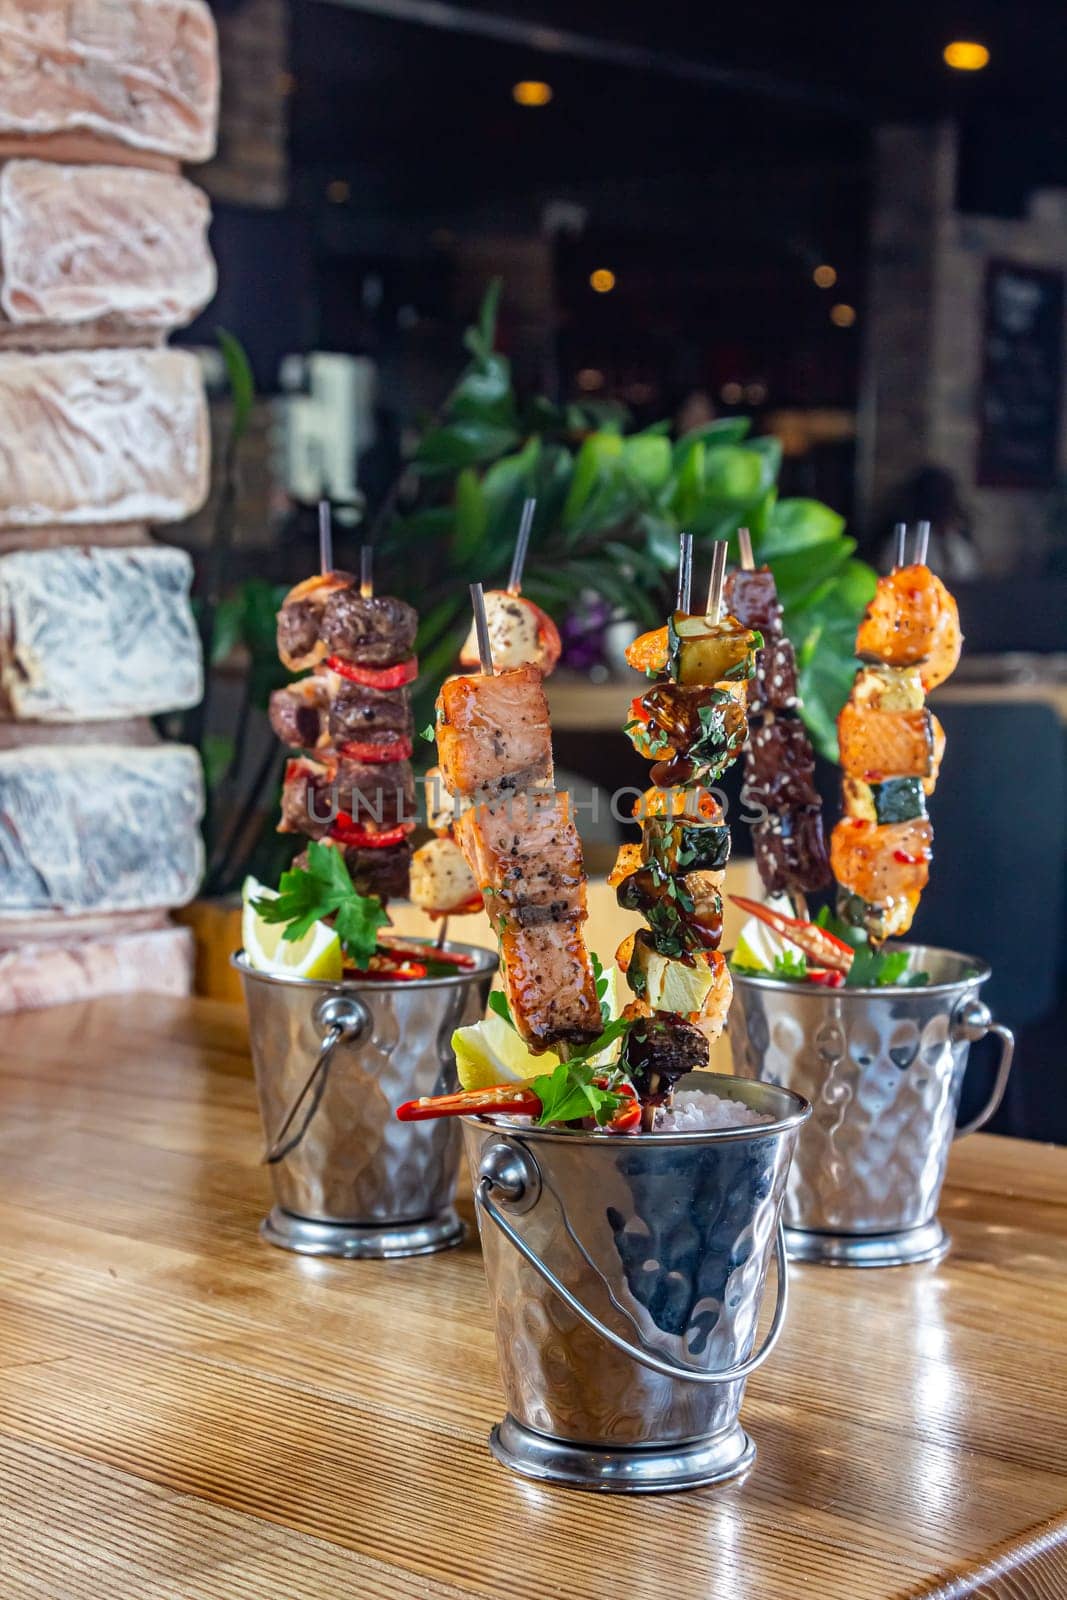 A lot of mini-kebabs of meat, fish, chicken, shrimp, vegetables on wooden skewers by Milanchikov